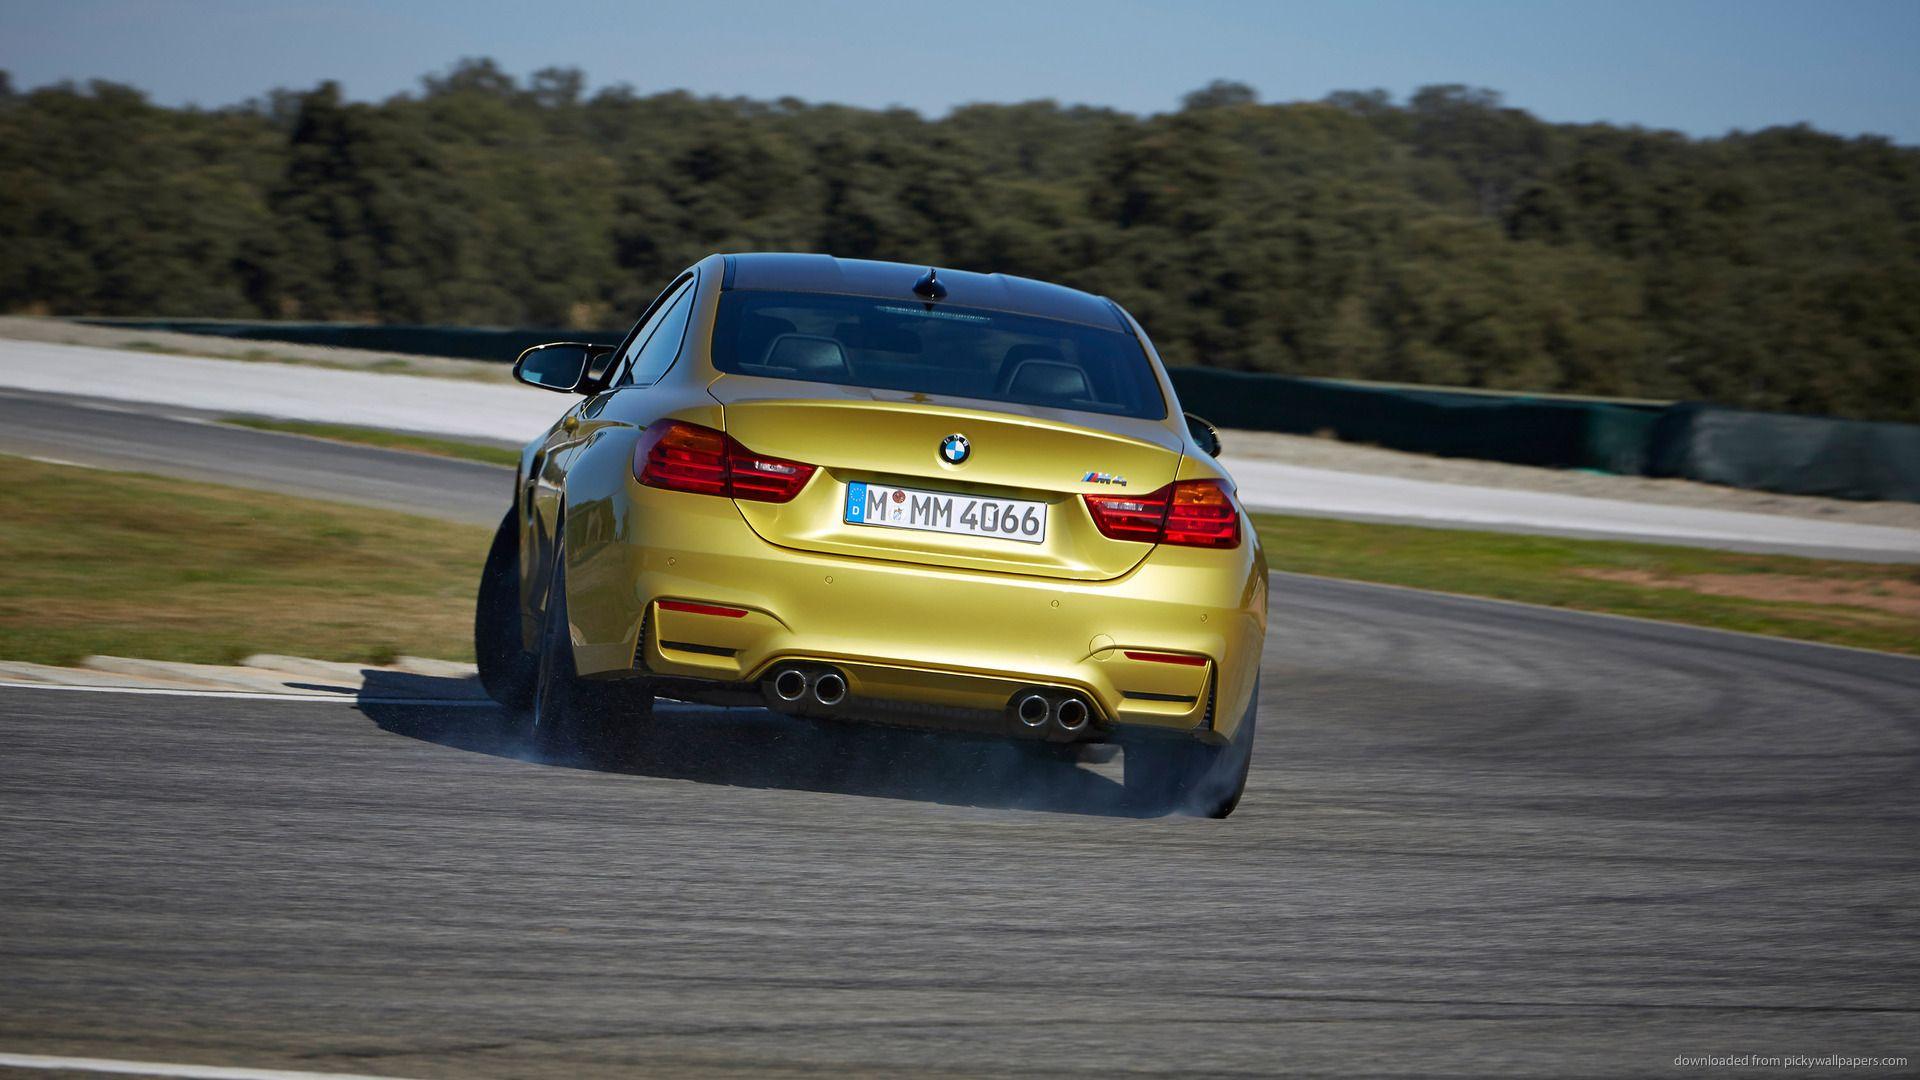 BMW M4 Drifting Wallpaper For iPhone 4